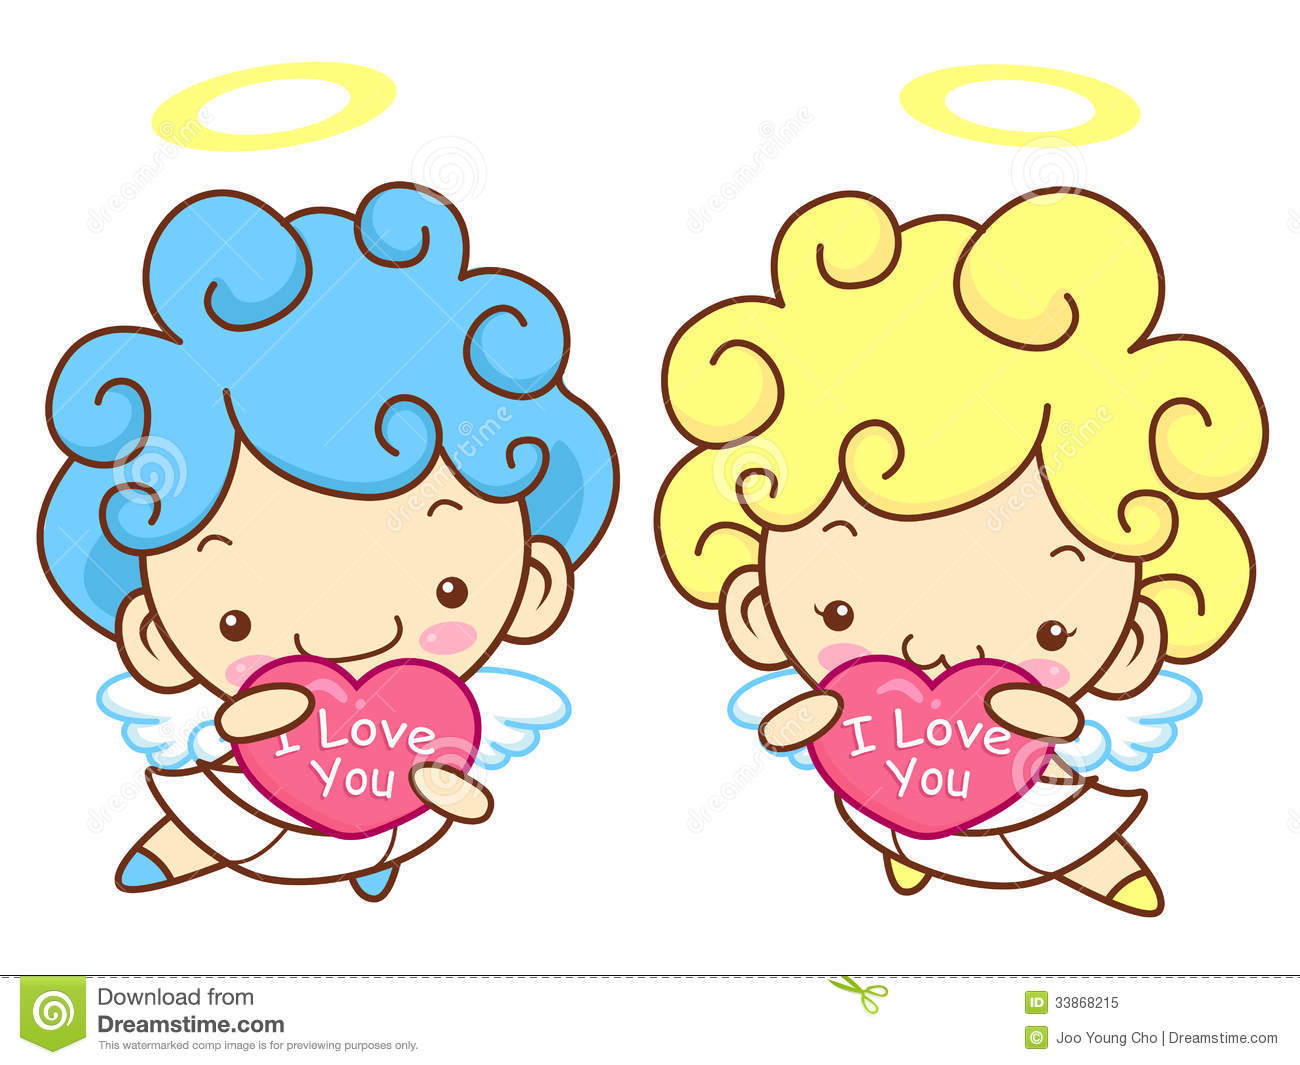 Angels Holding Hearts Clipart - Clip Art Bay